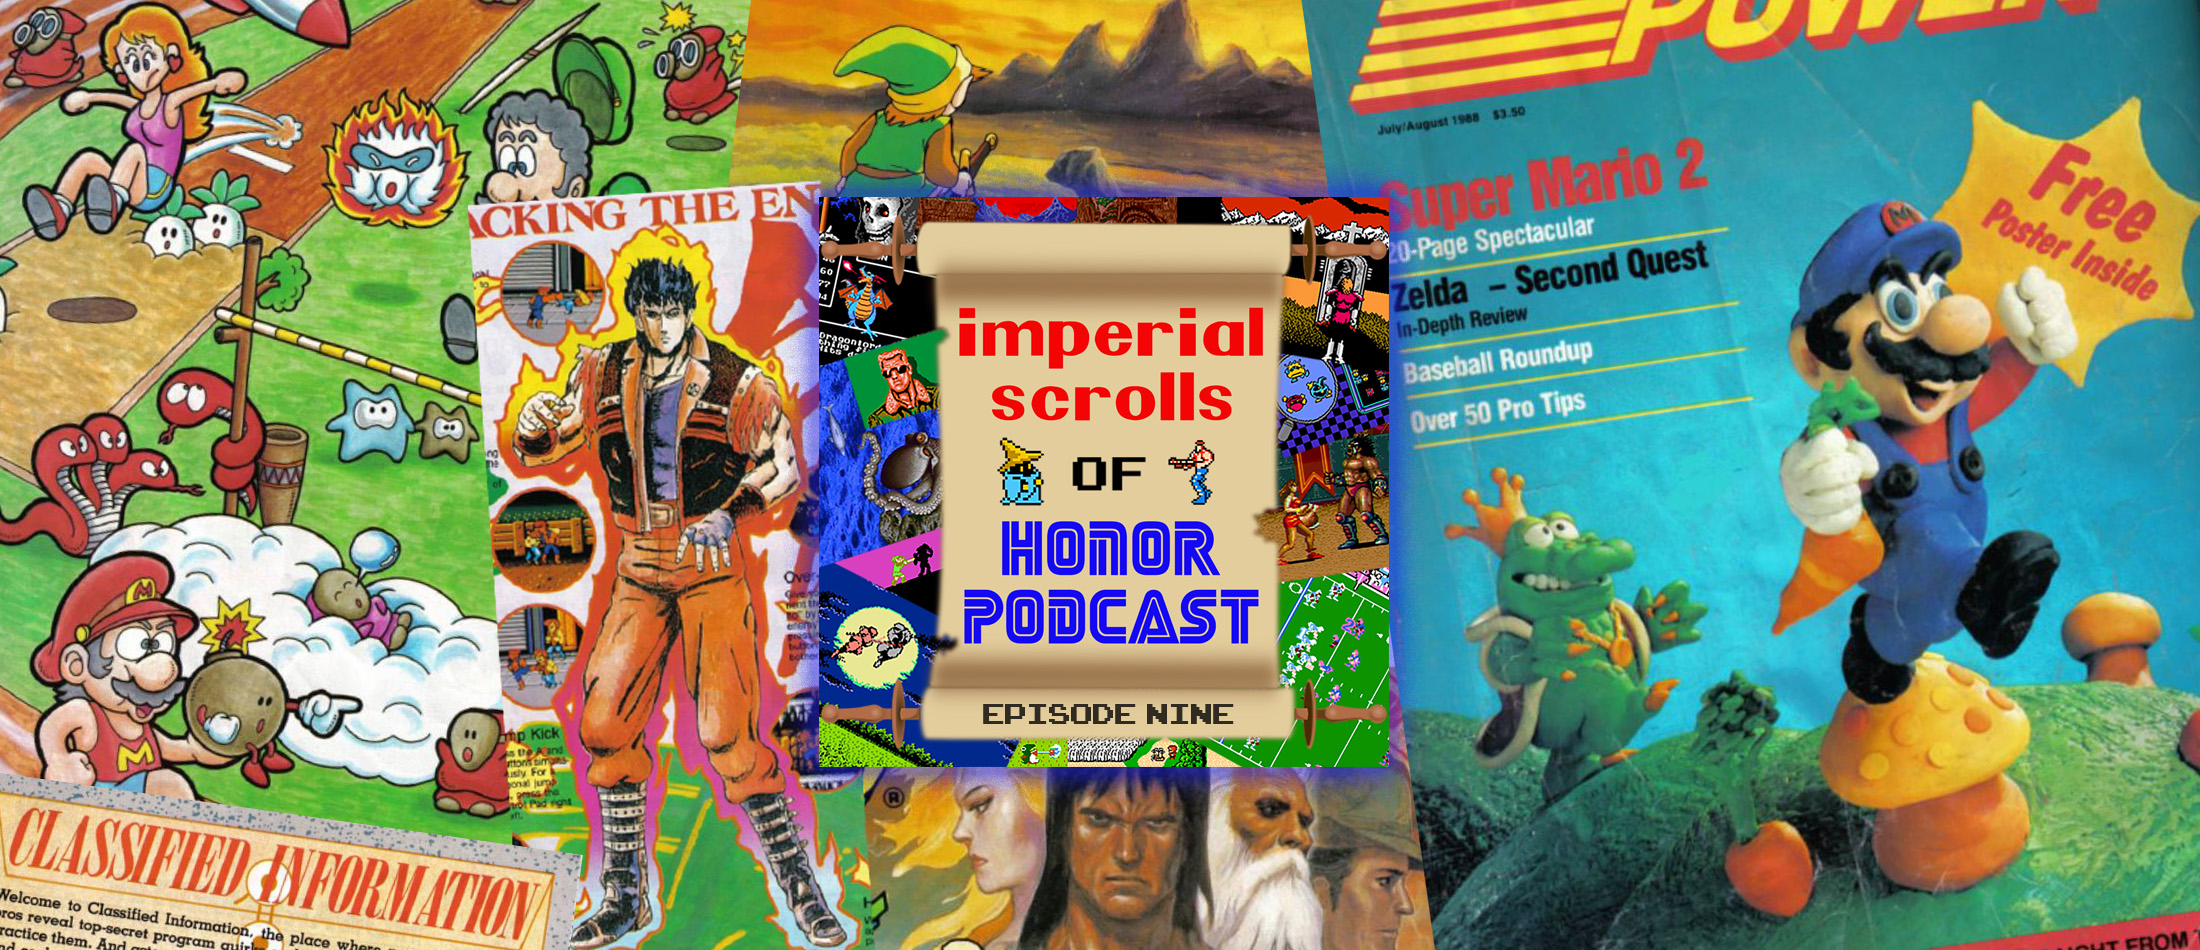 Imperial Scrolls of Honor Podcast - Episode 9 - Nintendo Power #1